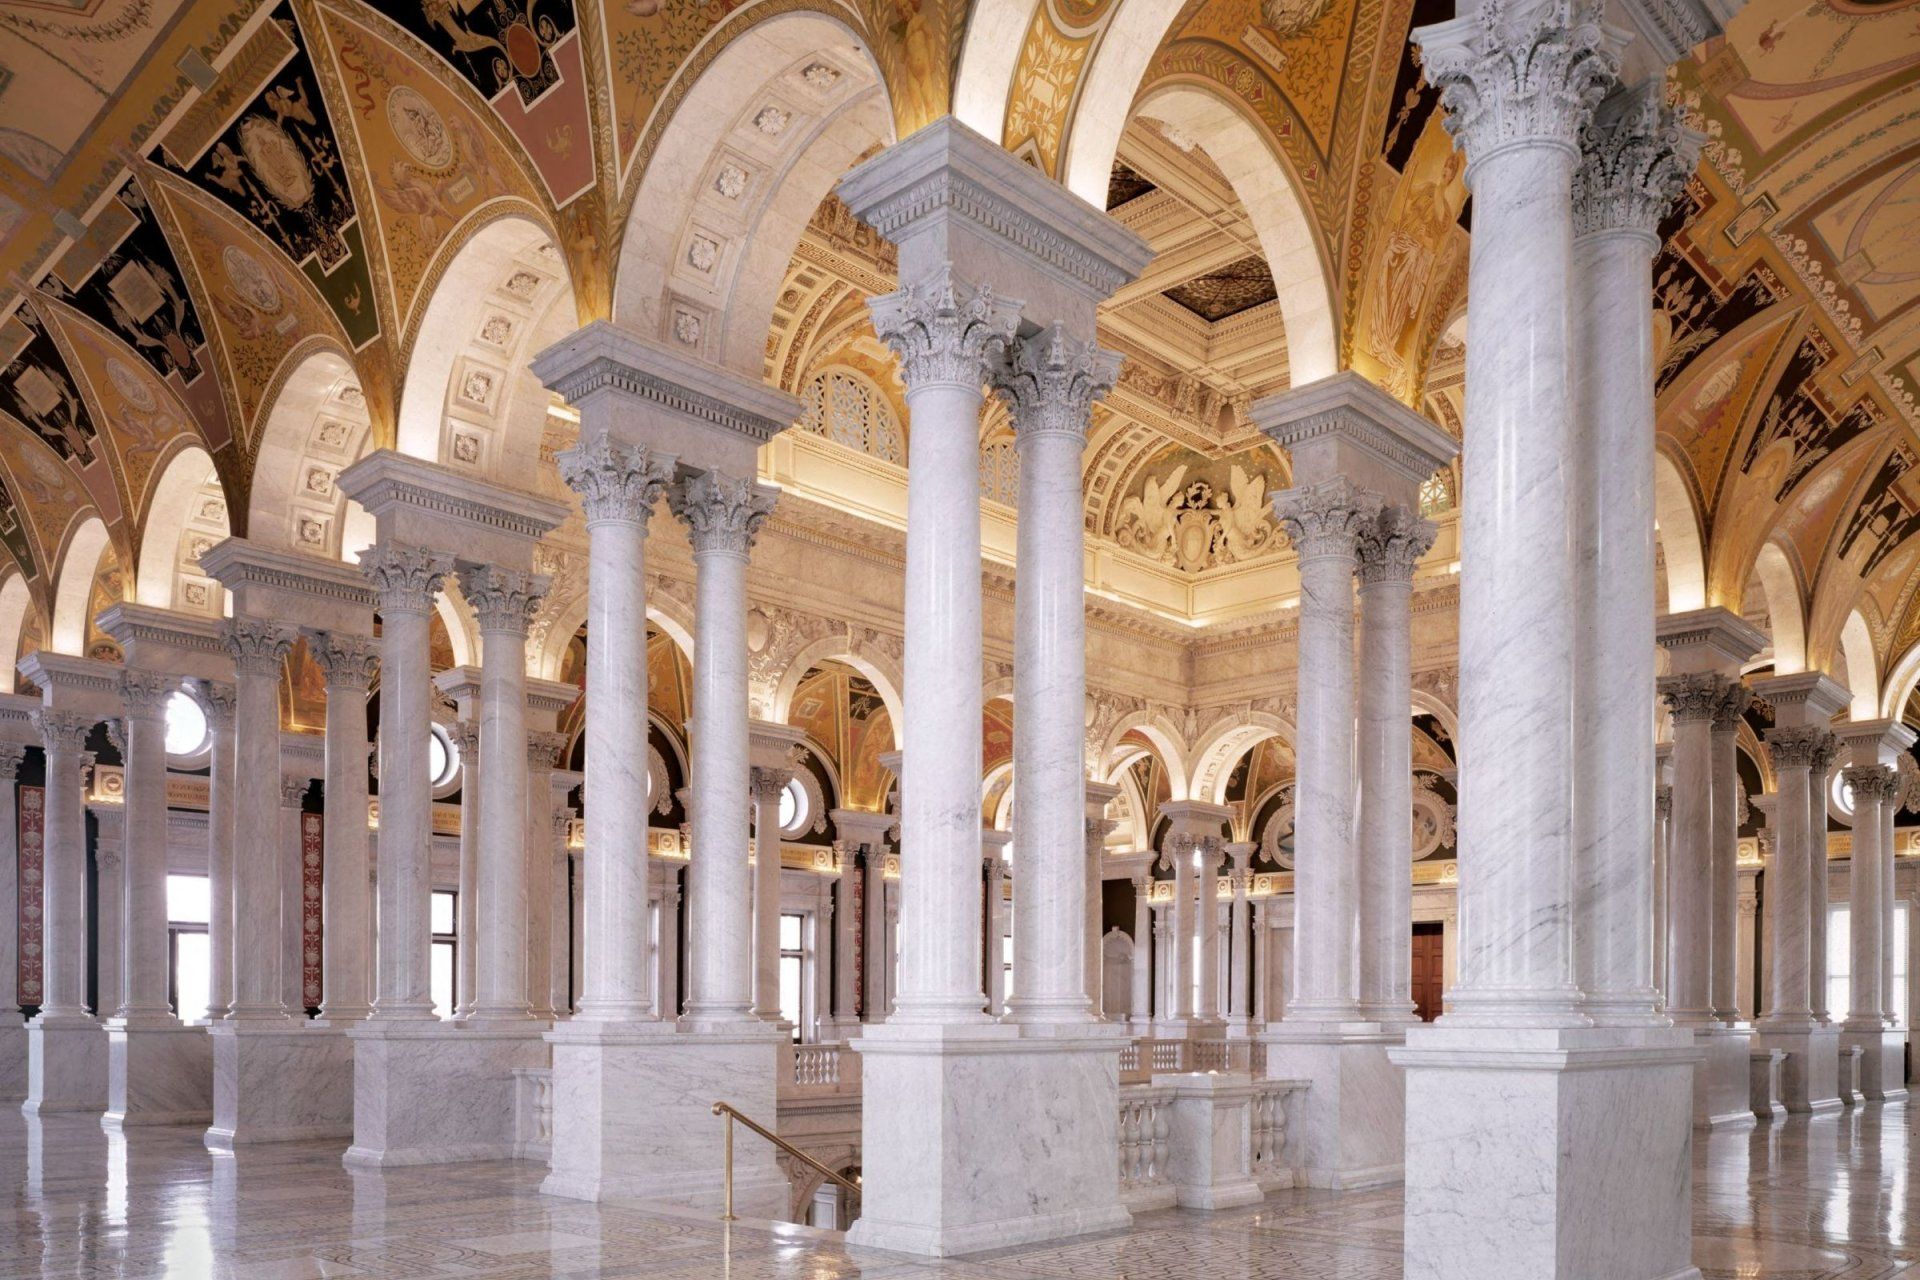 a building with columns and arches has a ceiling that says ' liberty ' on it